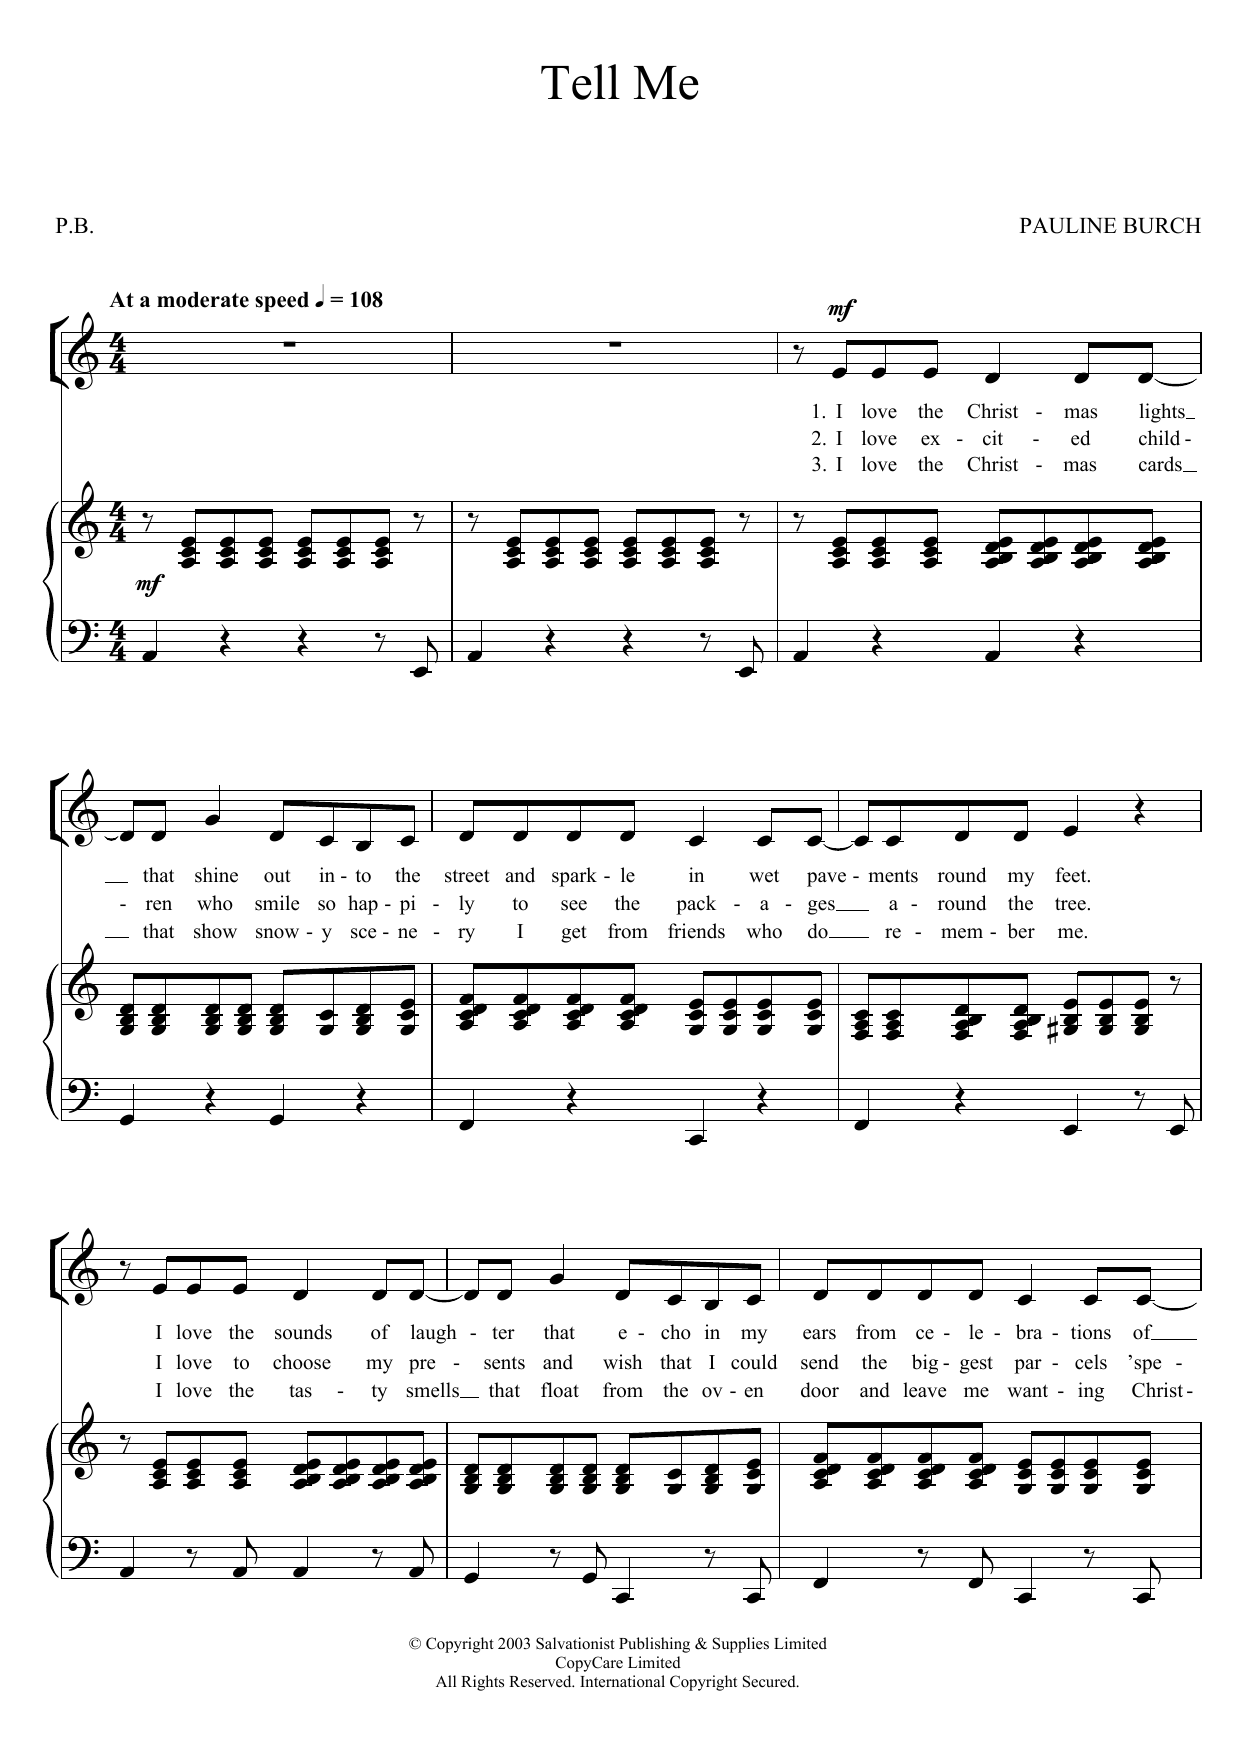 Download The Salvation Army Tell Me Sheet Music